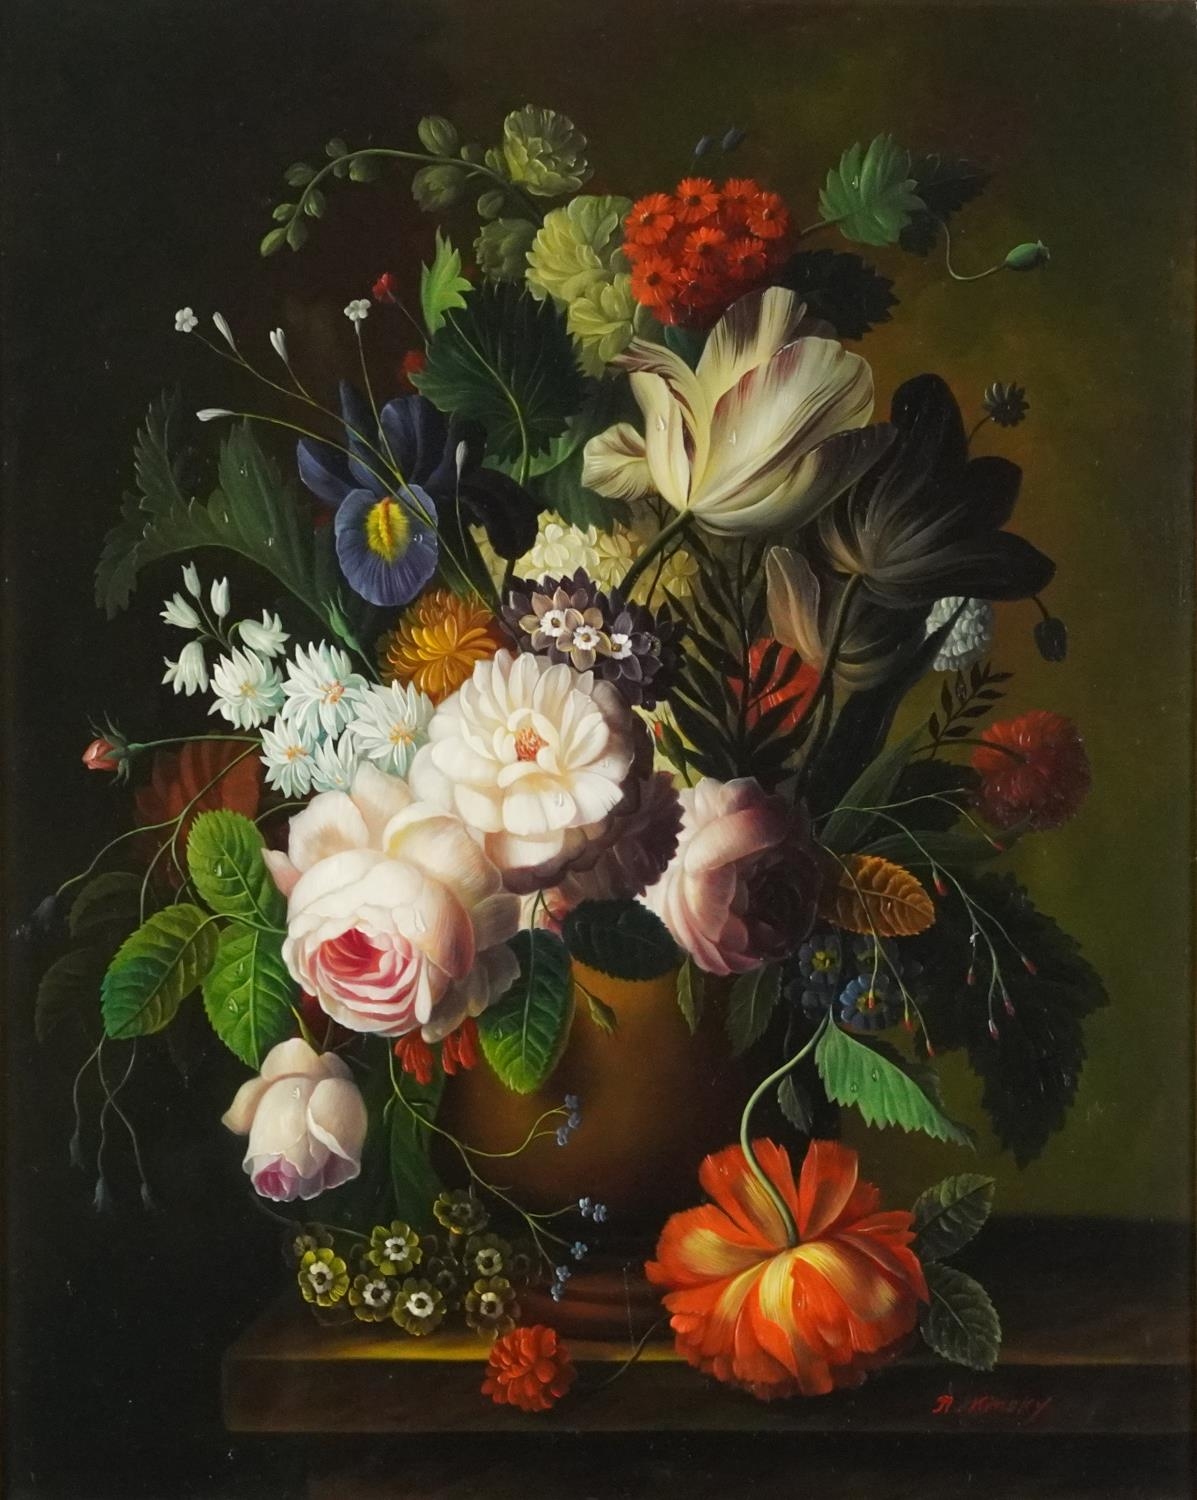 N Kinsky - Still life flowers in a vase, Old Master style oil on wood panel, mounted and framed,